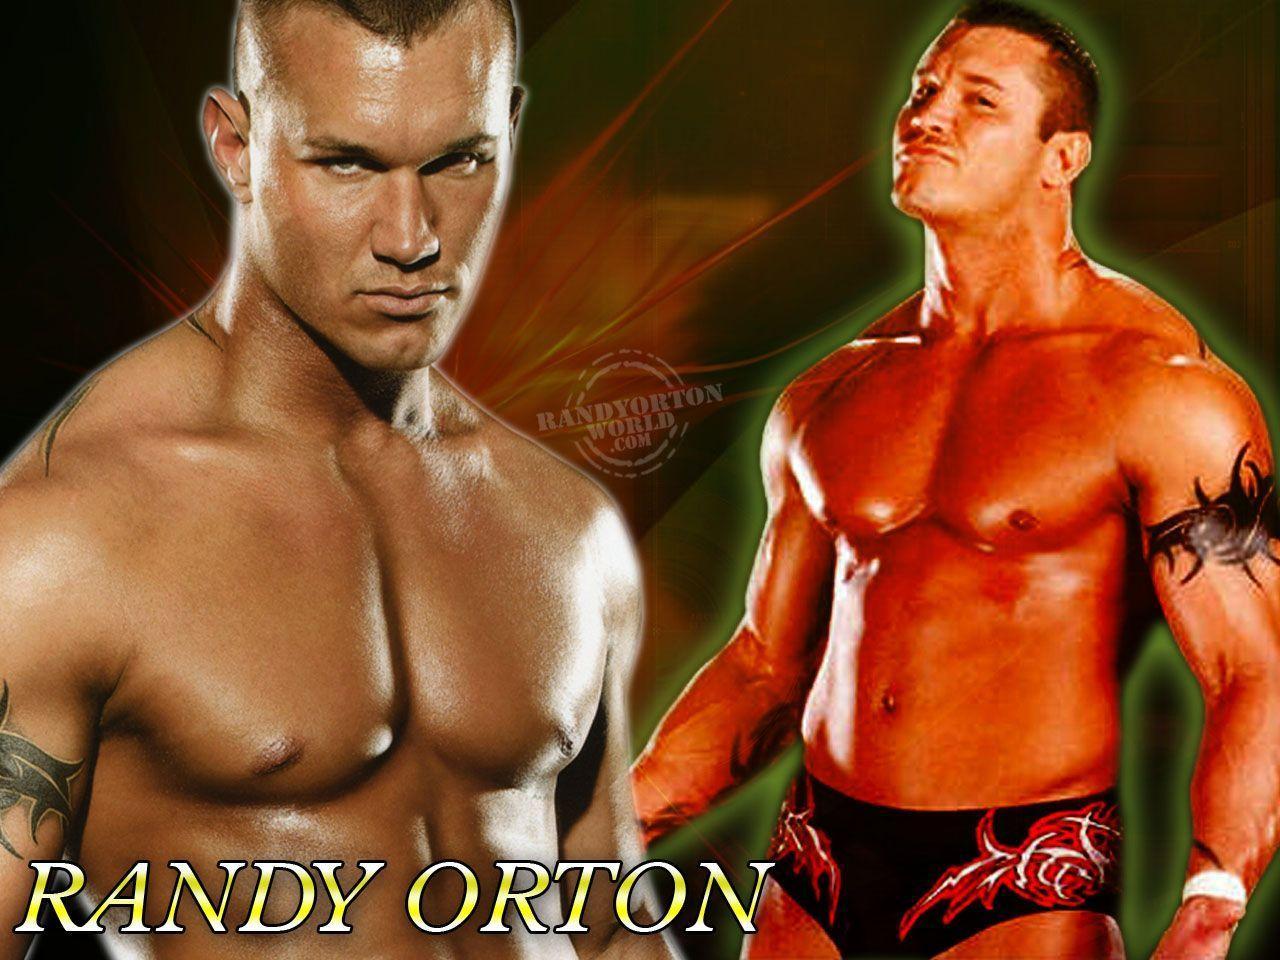 WWE Randy Orton Picture, Videos and more